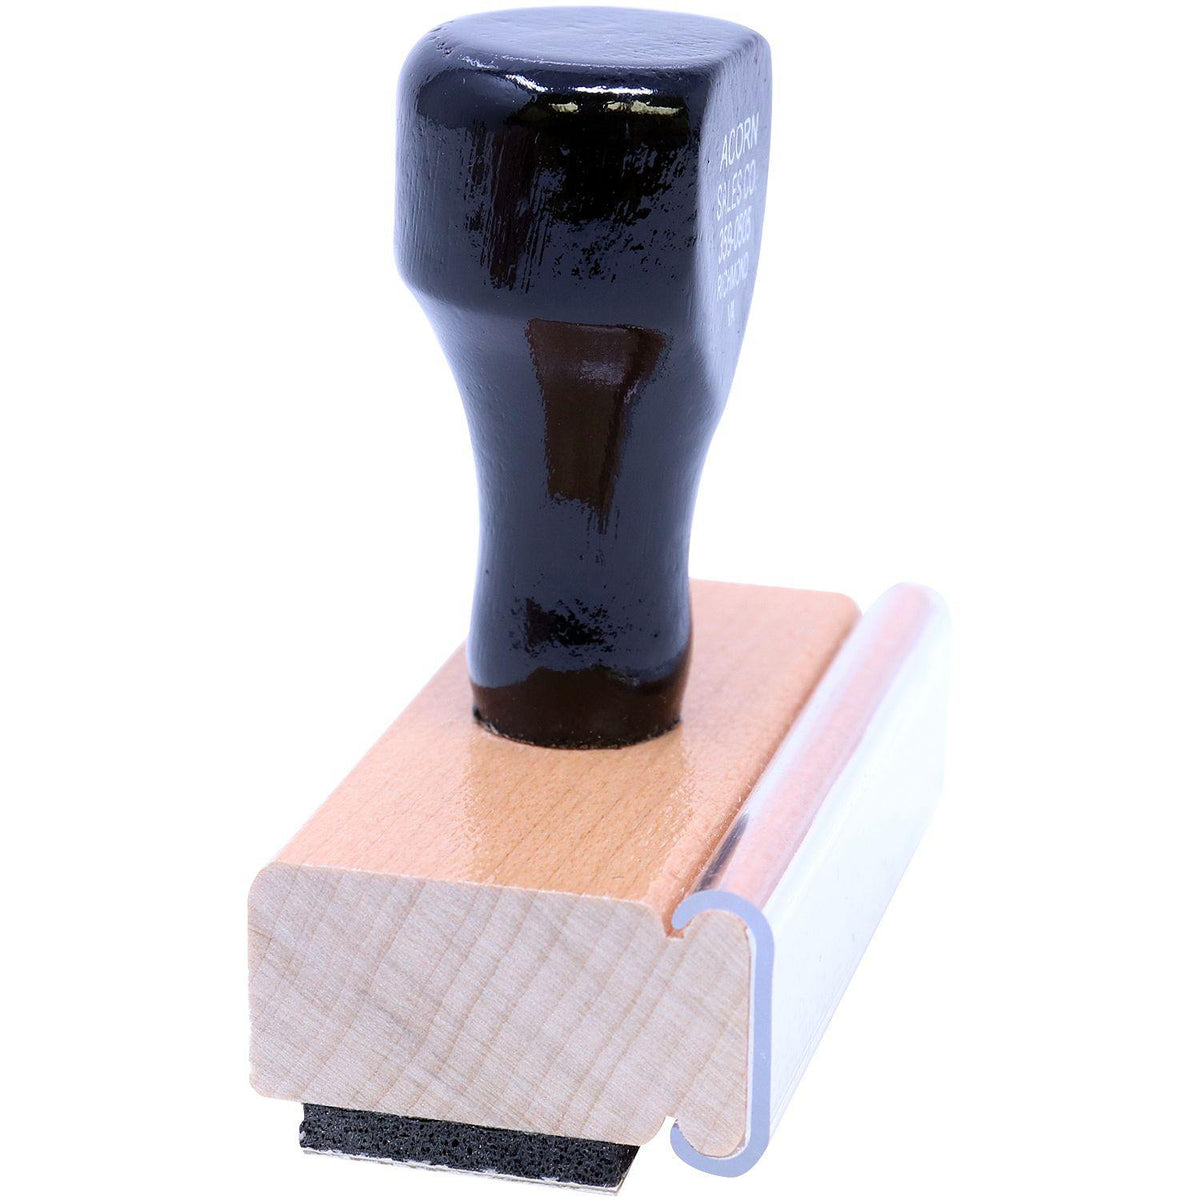 Side View of Large Medi Cal Rubber Stamp at an Angle